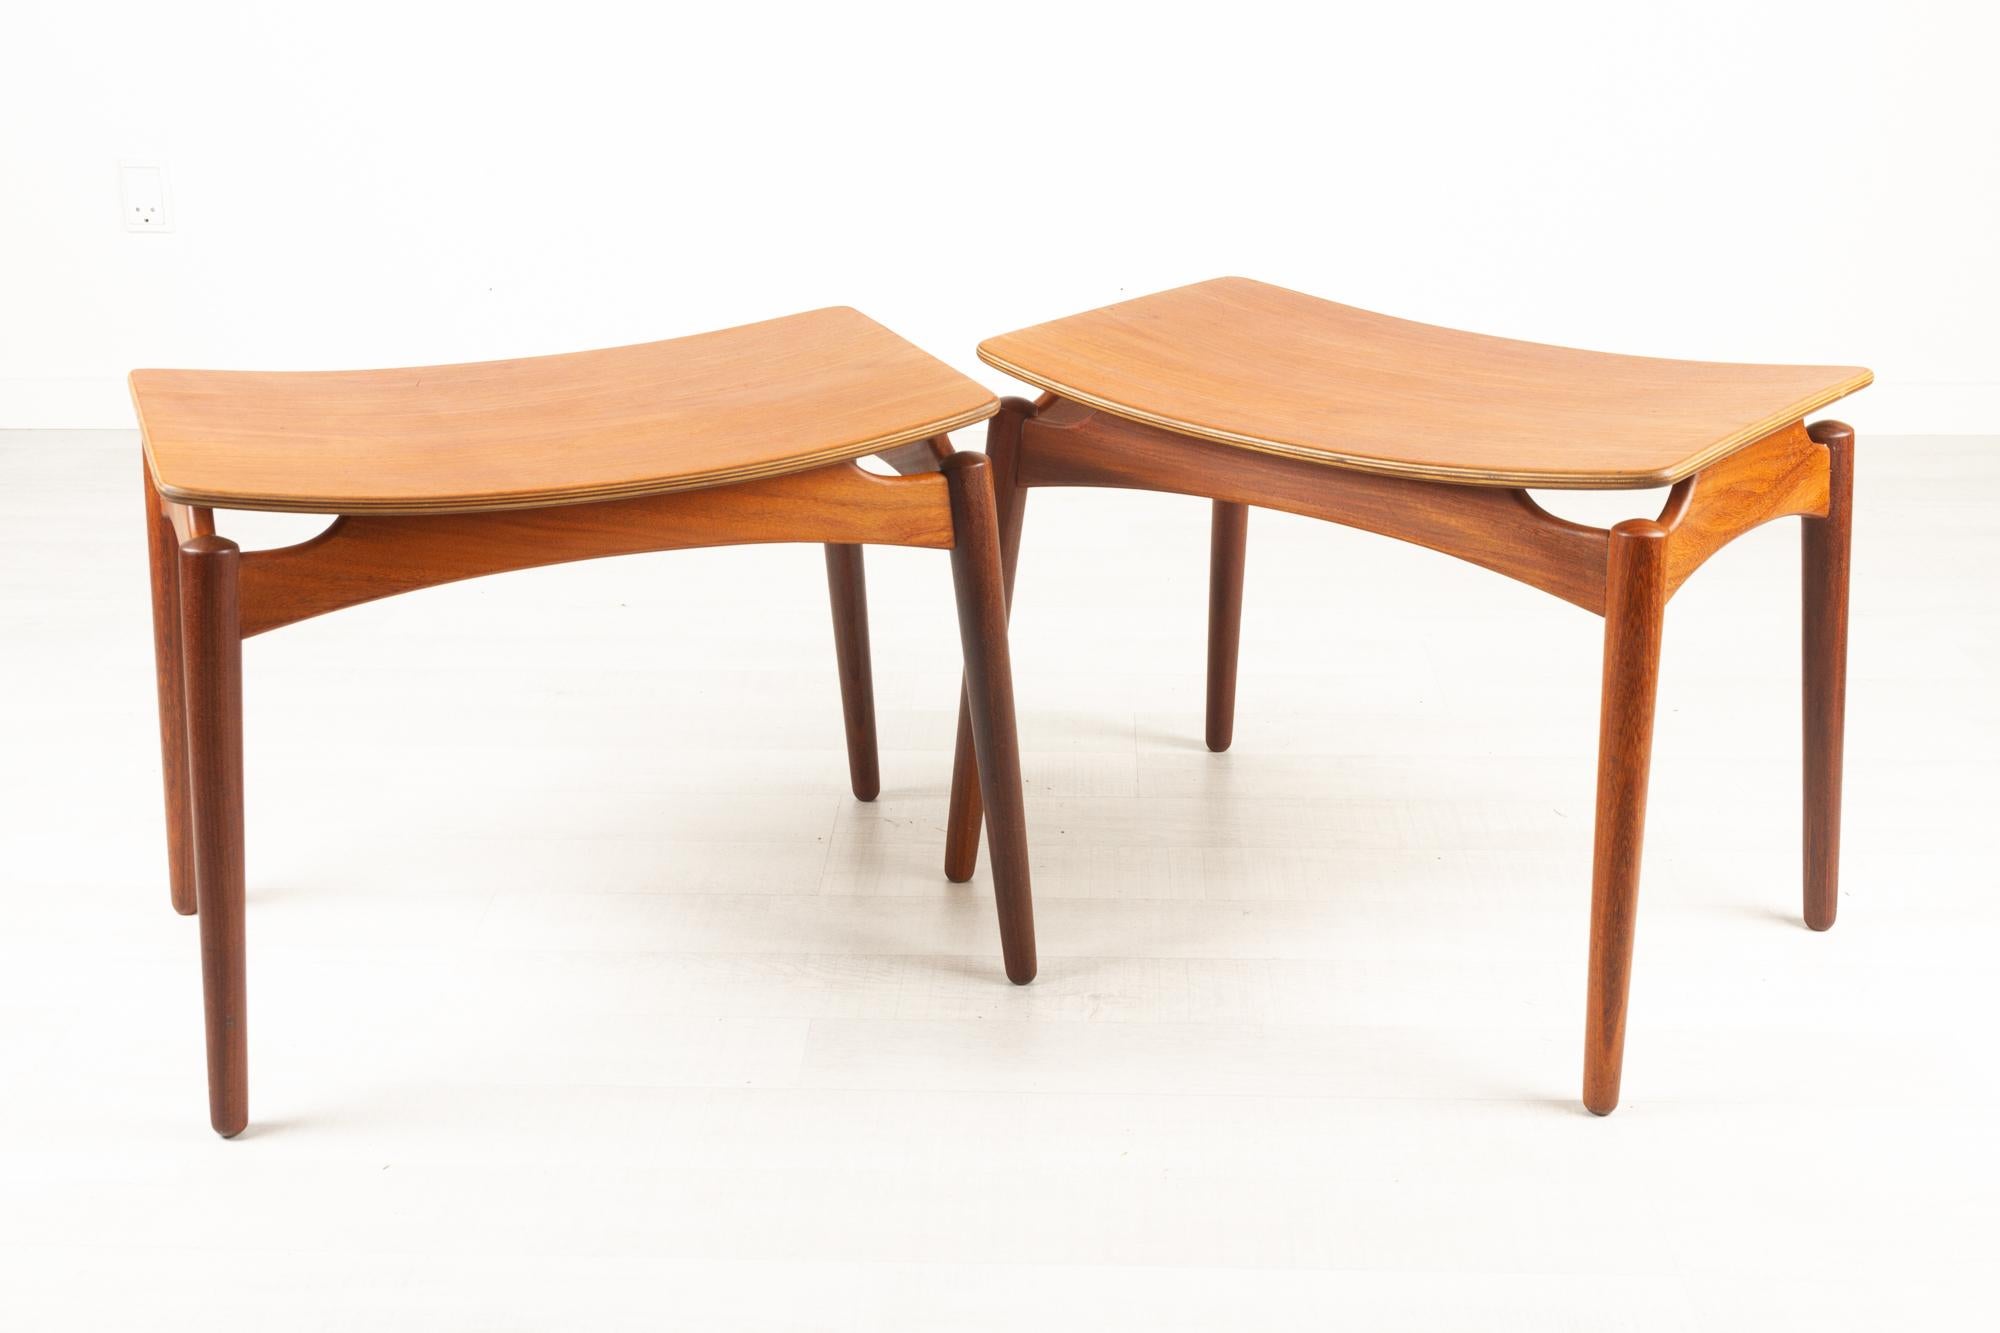 Vintage Danish teak footstools by sigfred Omann for Ølholm Møbelfabrik 1950s Set of 2.
Pair of identical Danish Mid-Century Modern foot rests. Very elegant design with curved frame and floating seat. Round tapered legs and frame in solid teak, top